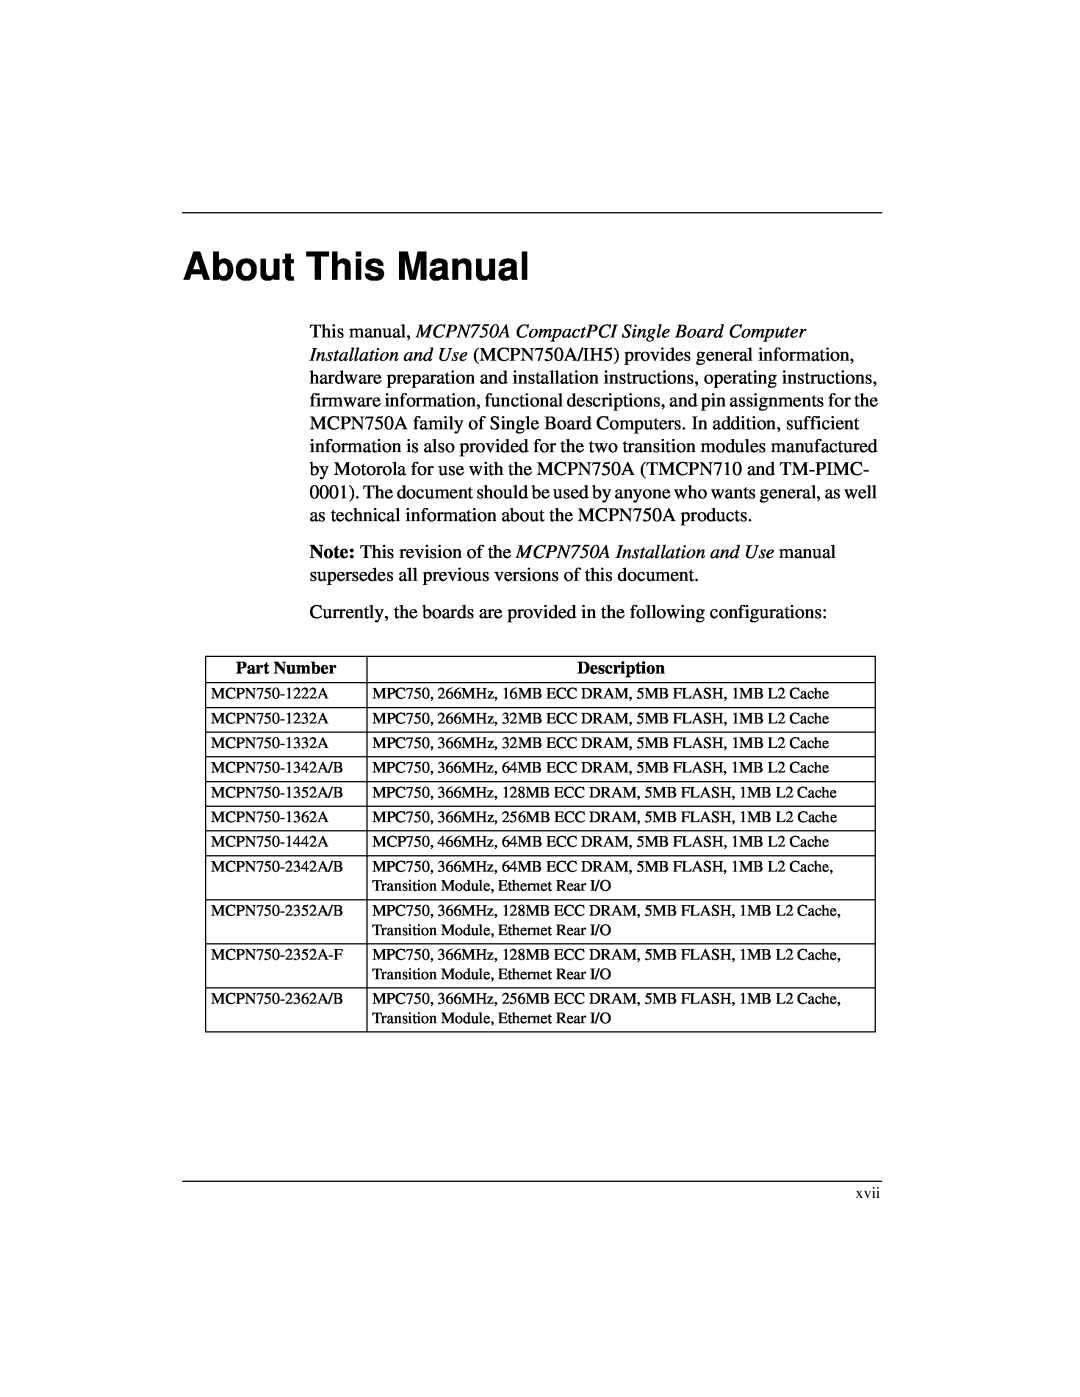 Motorola IH5, MCPN750A manual About This Manual, Currently, the boards are provided in the following configurations 